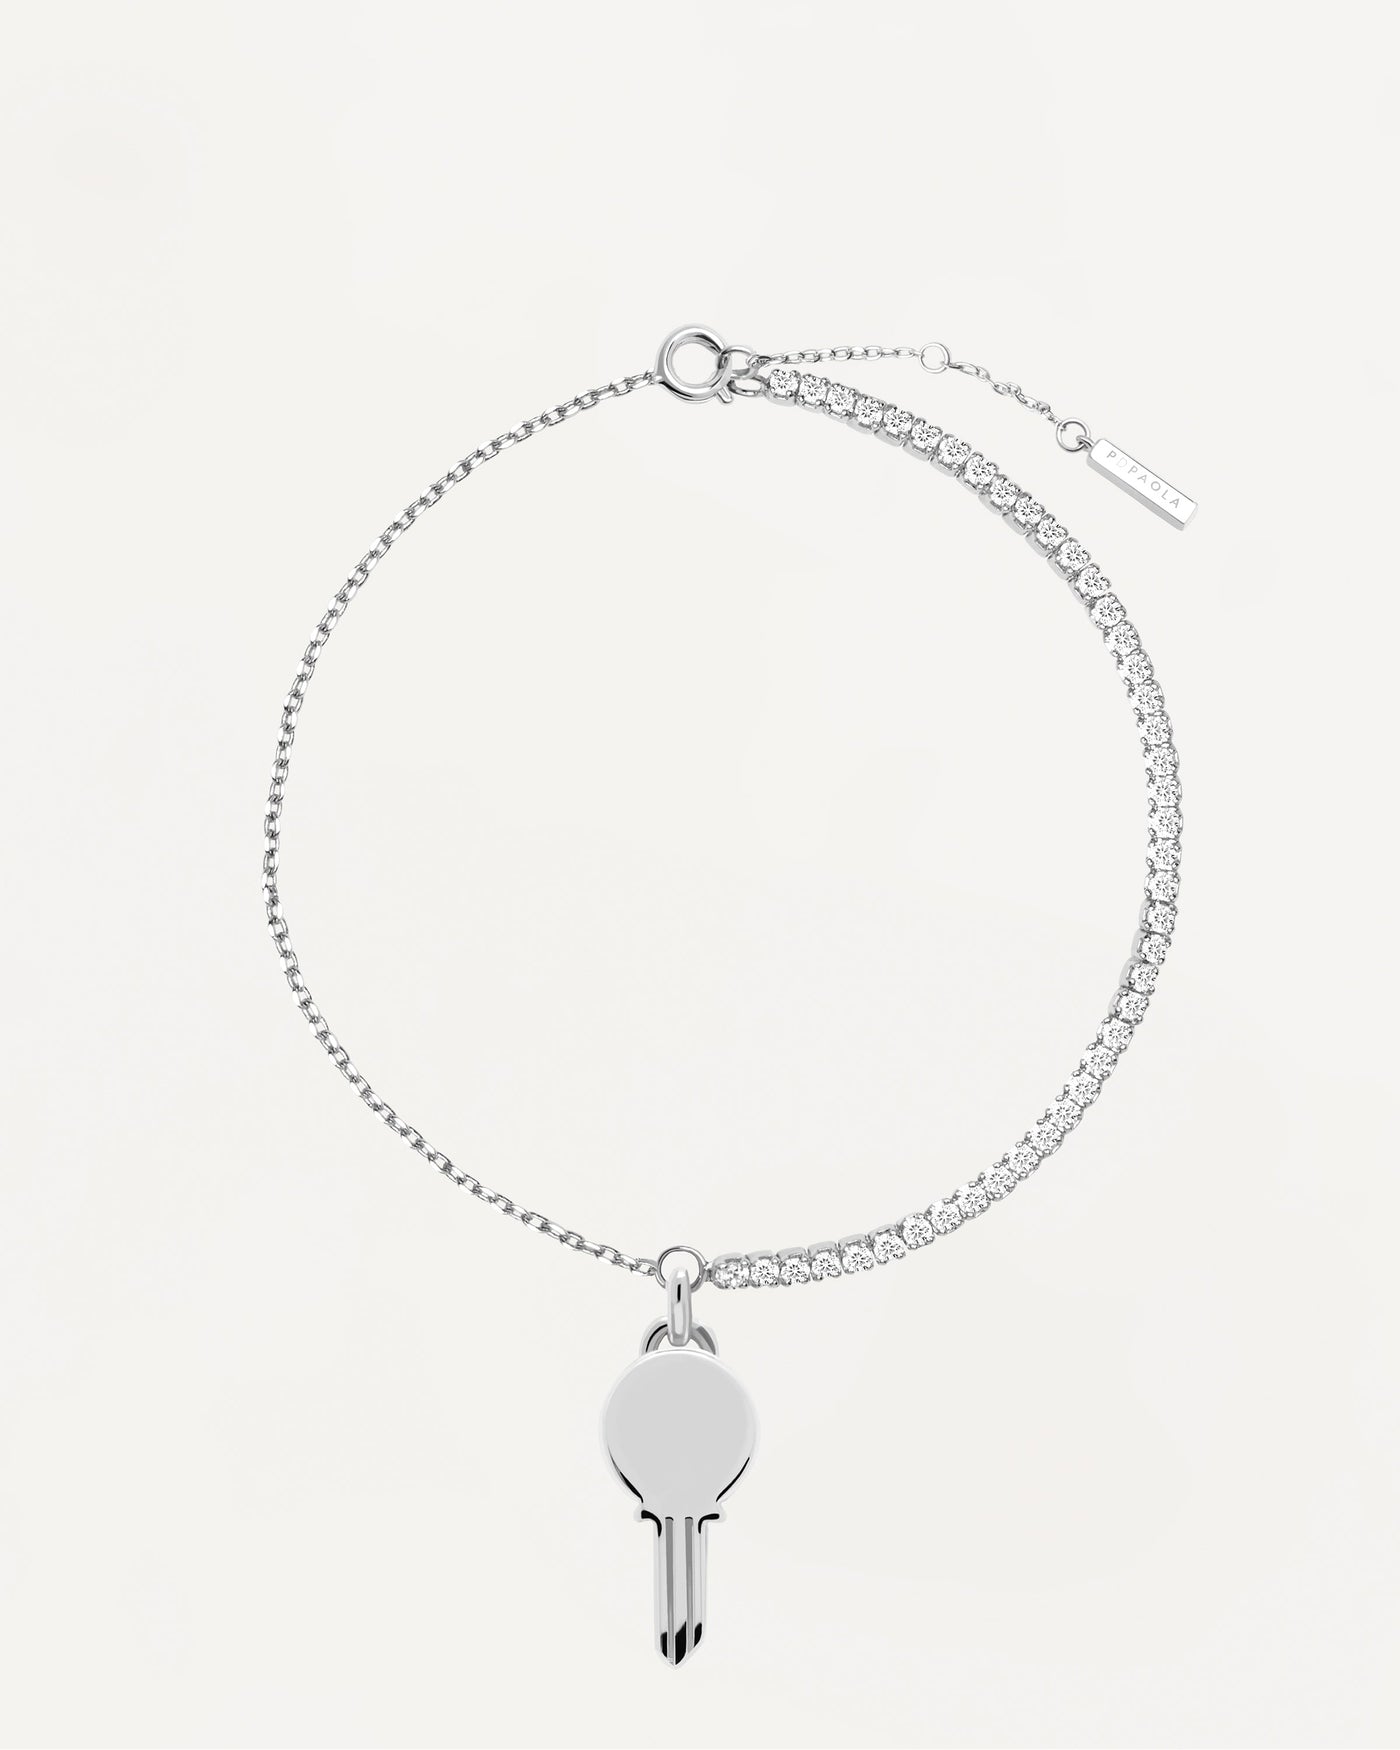 2023 Selection | Eternum Silver Bracelet. Sterling silver bracelet with white zirconia and customizable key pendant. Get the latest arrival from PDPAOLA. Place your order safely and get this Best Seller. Free Shipping.